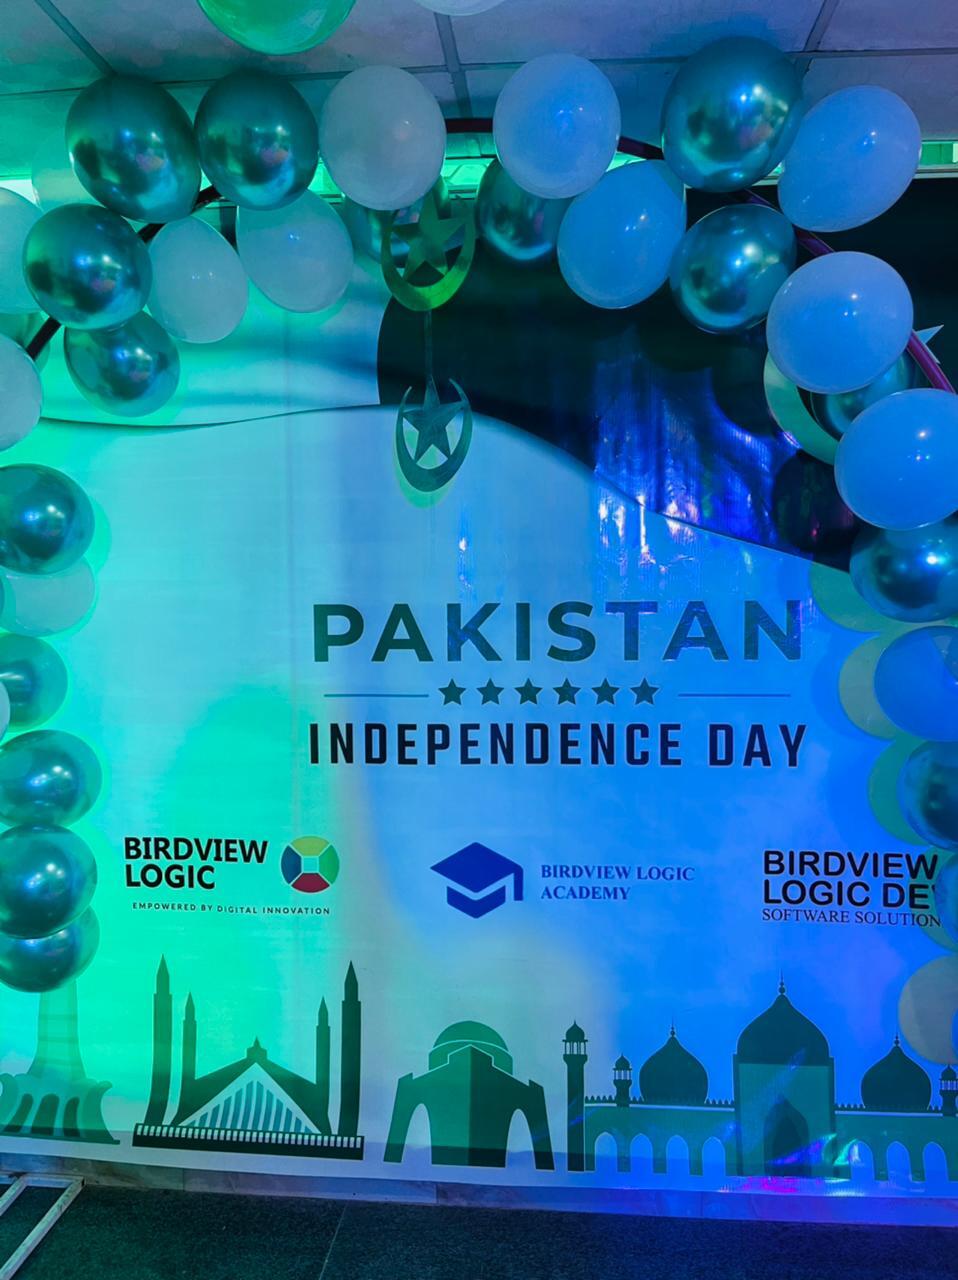 75th Independence day at BVL Image 8